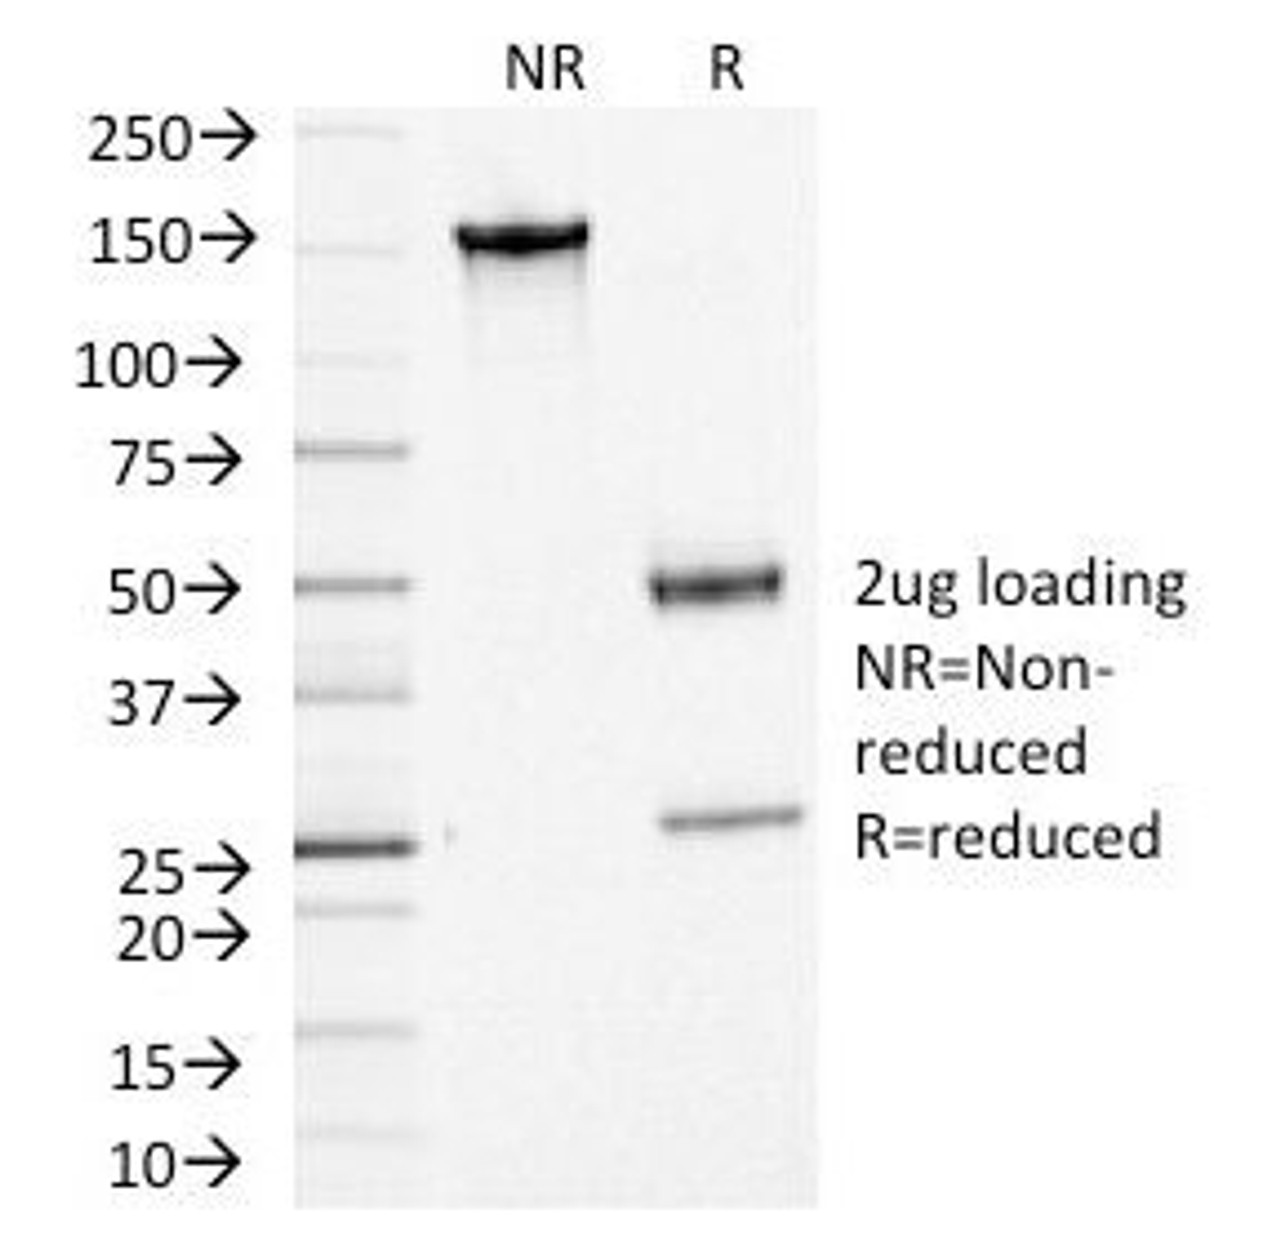 SDS-PAGE Analysis of Purified, BSA-Free ACTH Antibody (clone CLIP/1449) . Confirmation of Integrity and Purity of the Antibody.